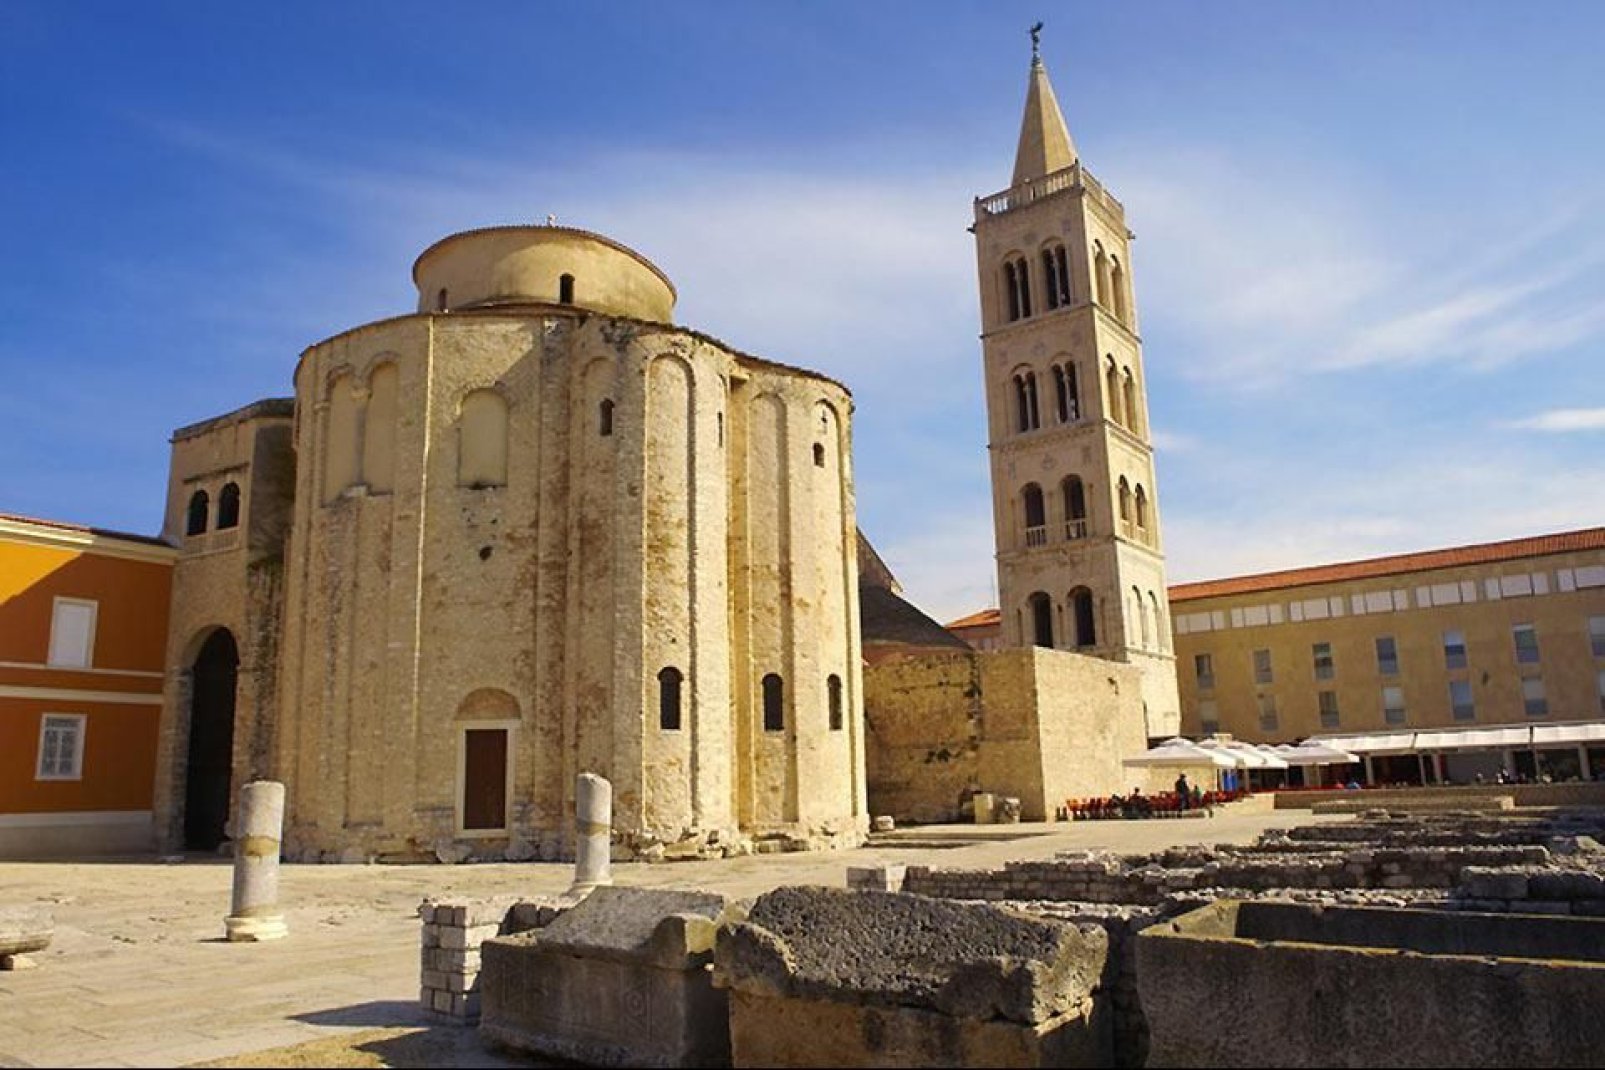 Here we see the Byzantine-style church in Zadar with, to the right, the bell tower of St. Anastasia Cathedral